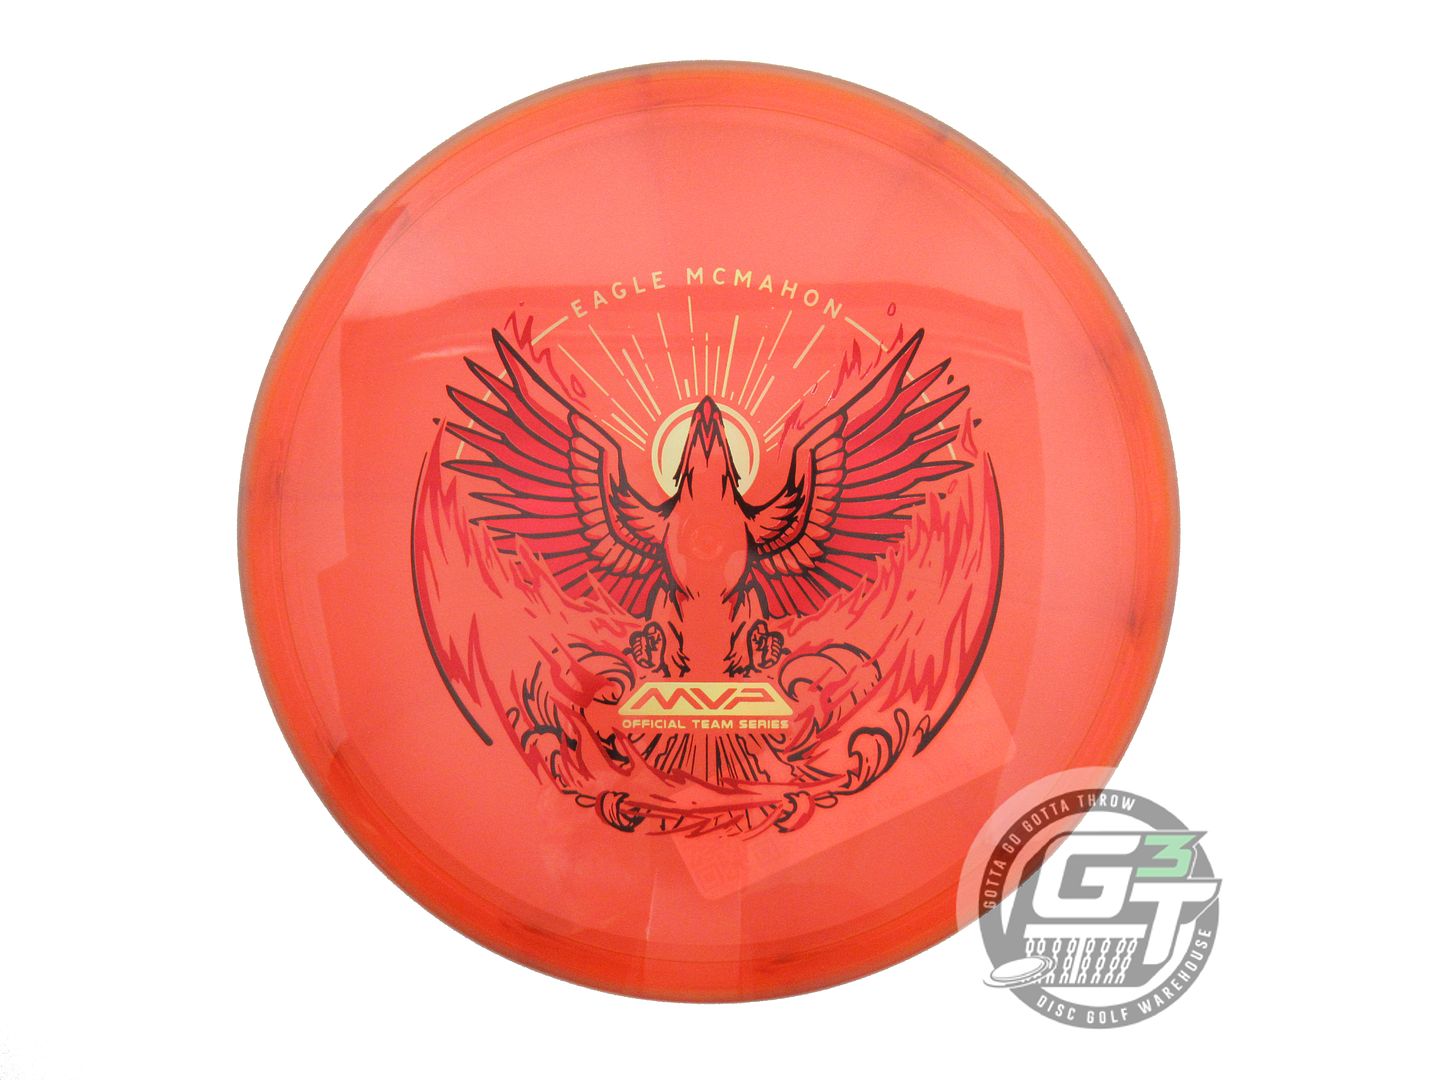 Axiom Limited Edition 2024 Team Series Eagle McMahon Rebirth Prism Proton Envy Putter Golf Disc (Individually Listed)